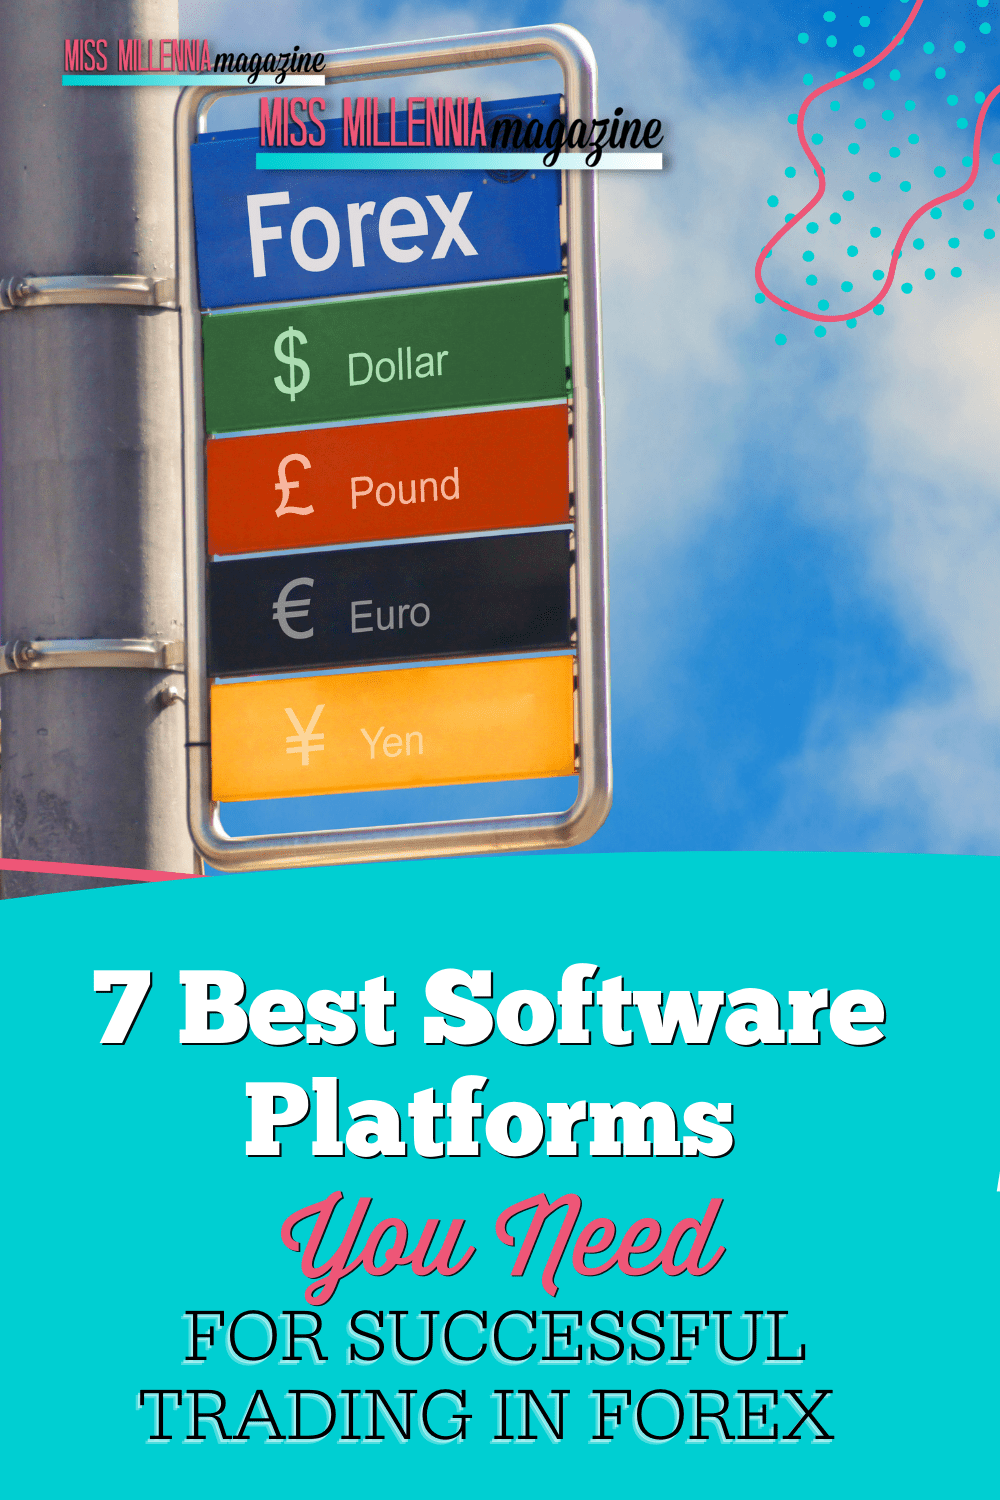 7 Best Software Platforms You Need for Successful Trading in Forex